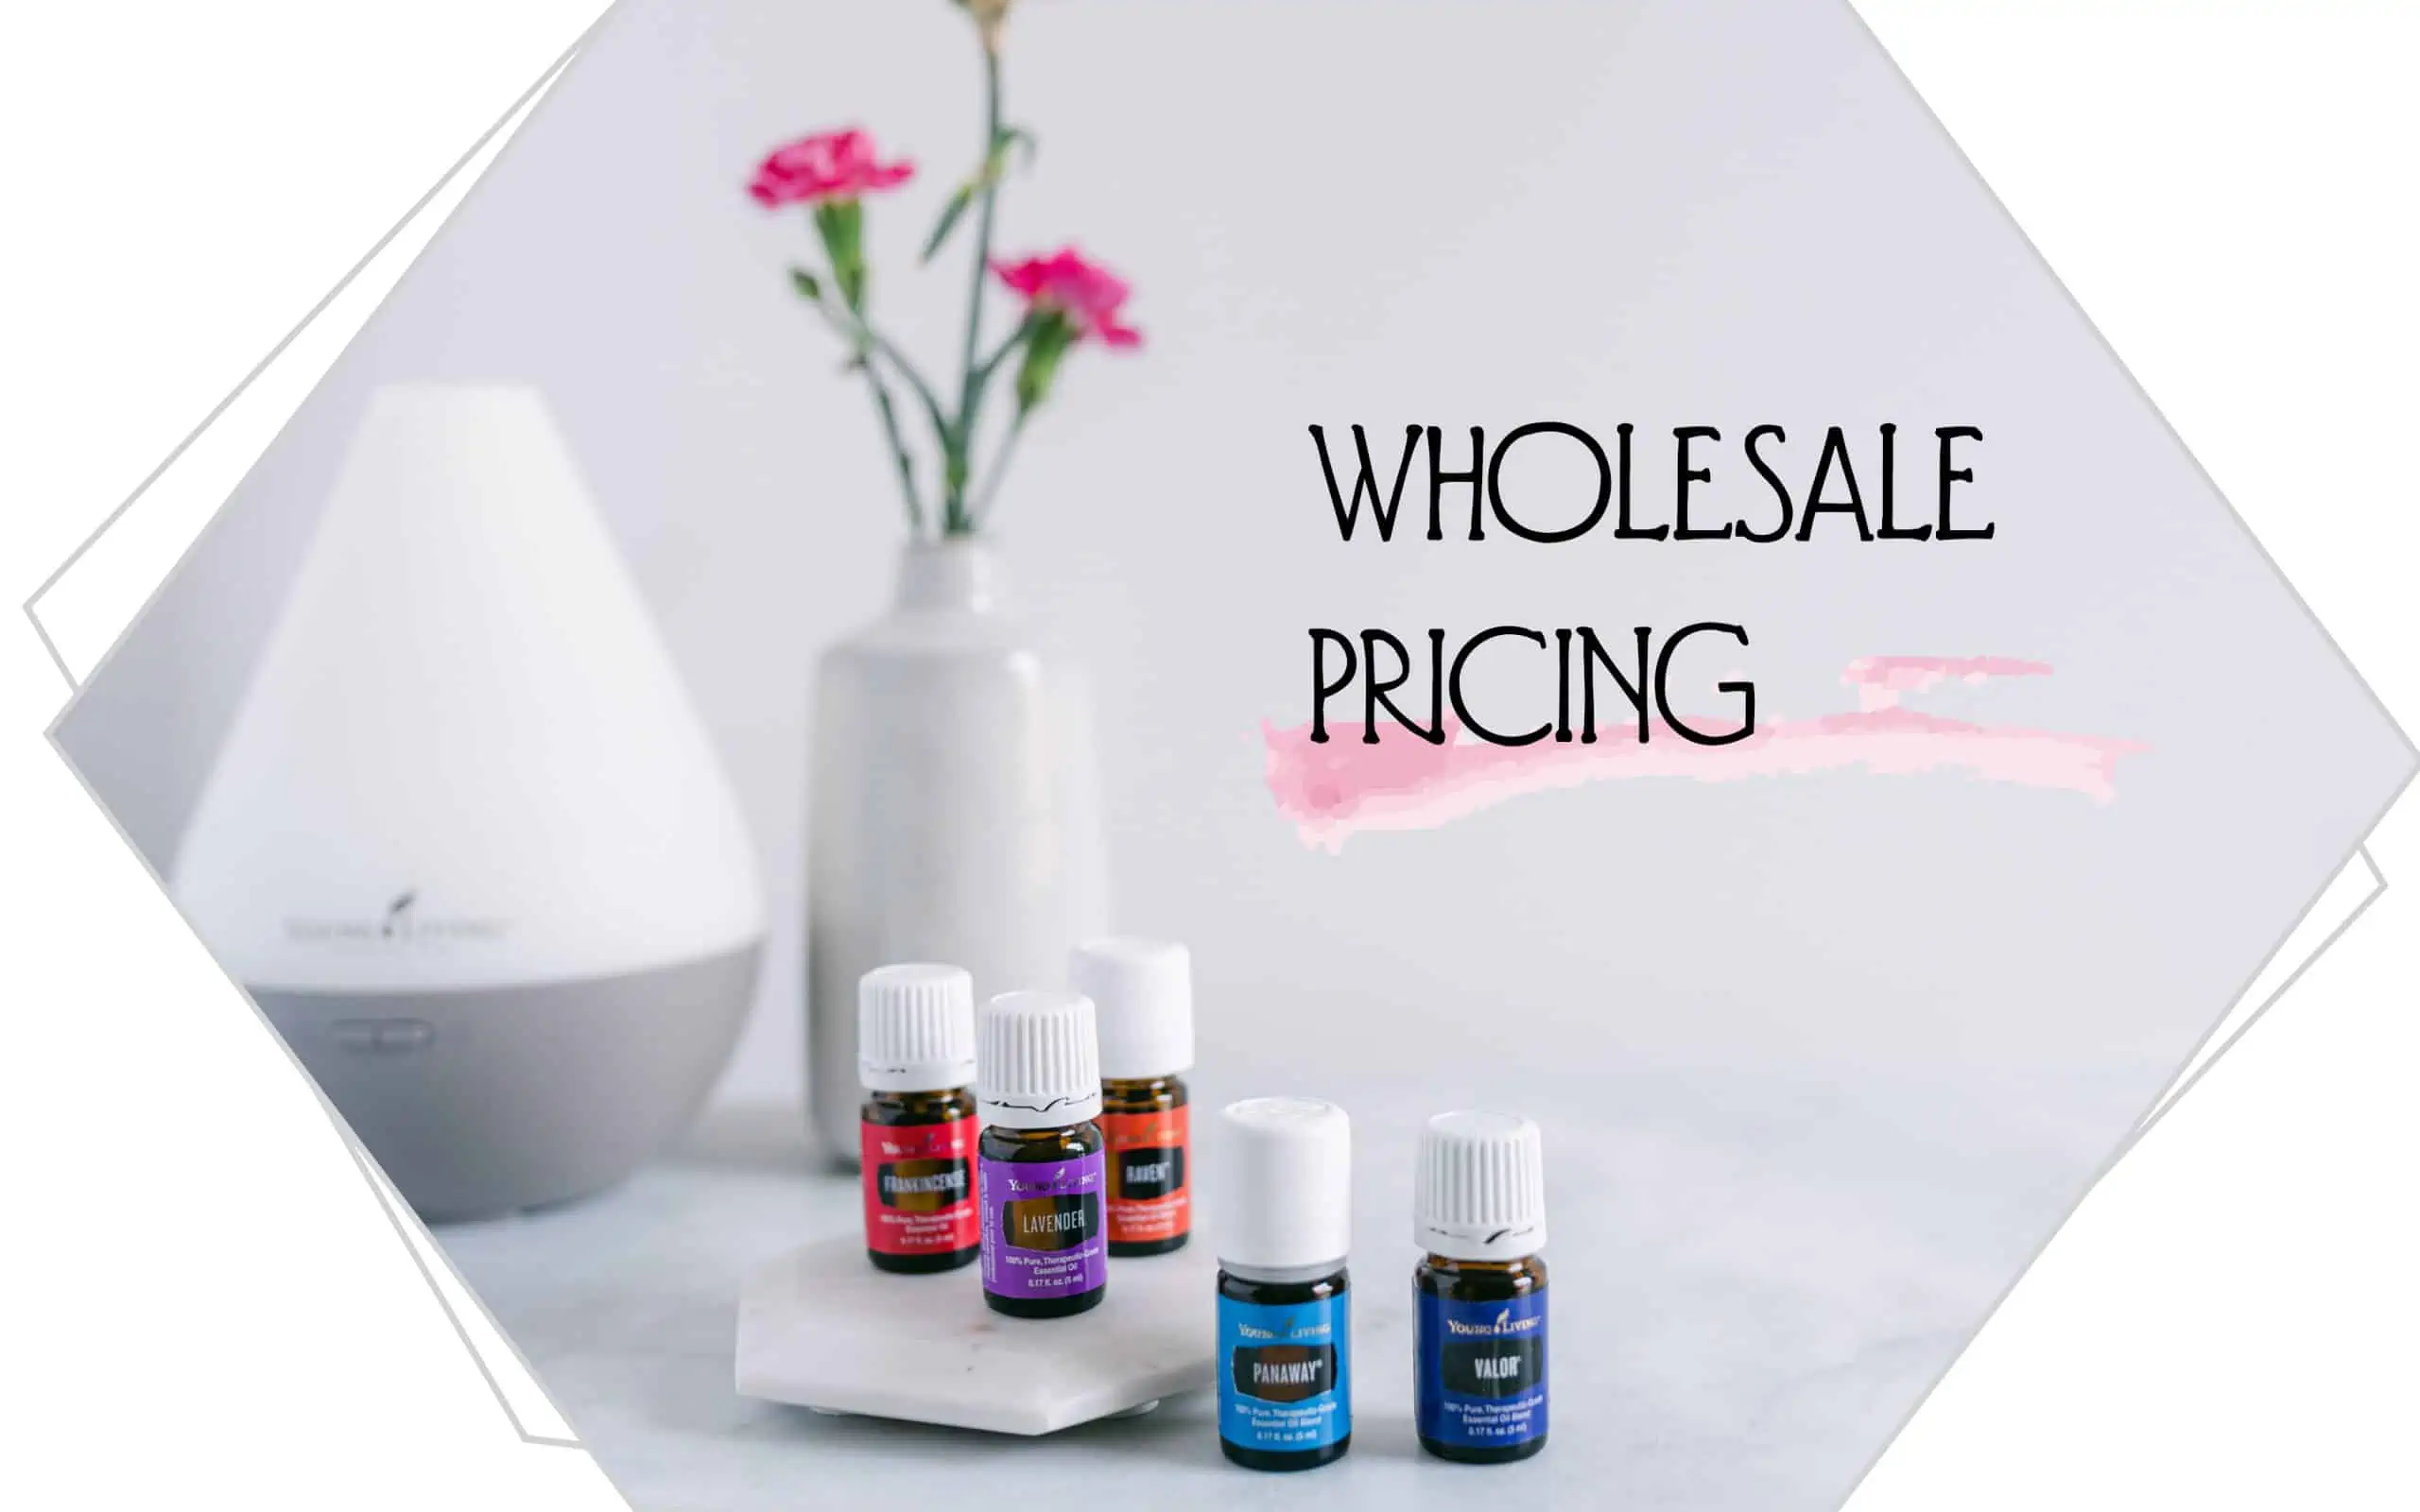 Wholesale Pricing with essential oils , a diffuser, and a vase of pink carnations.